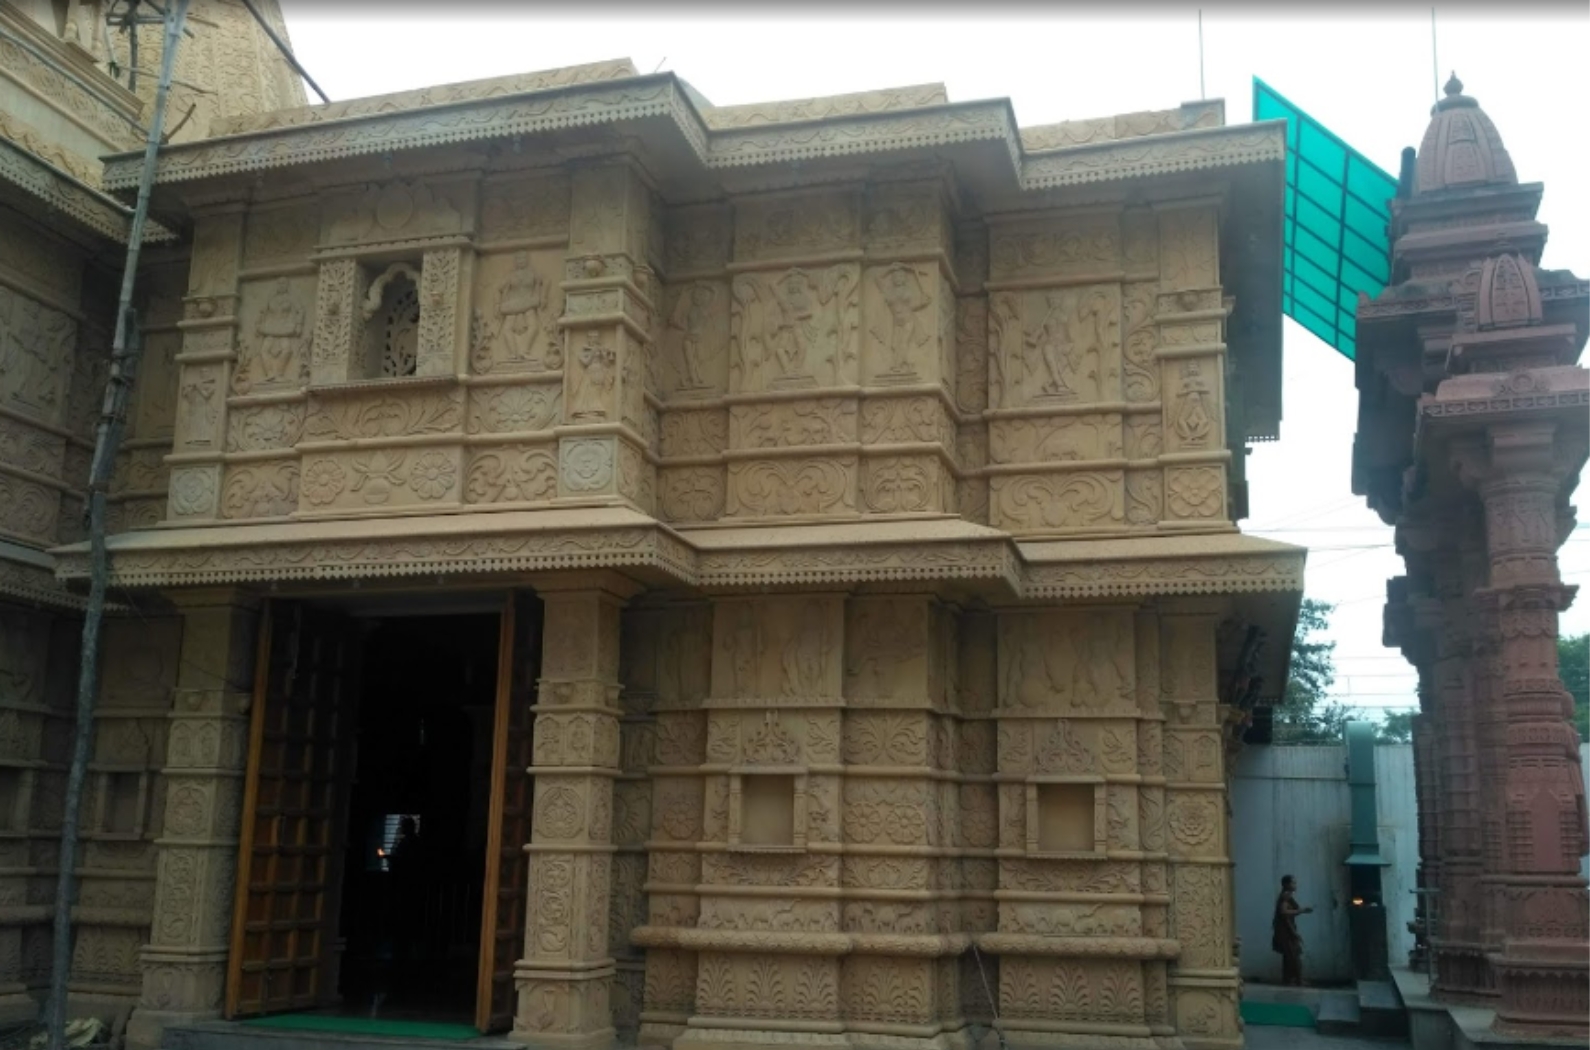 When you enter this temple you can see goddess Chandi Devi is situated. The rooms of this temple are well maintained.